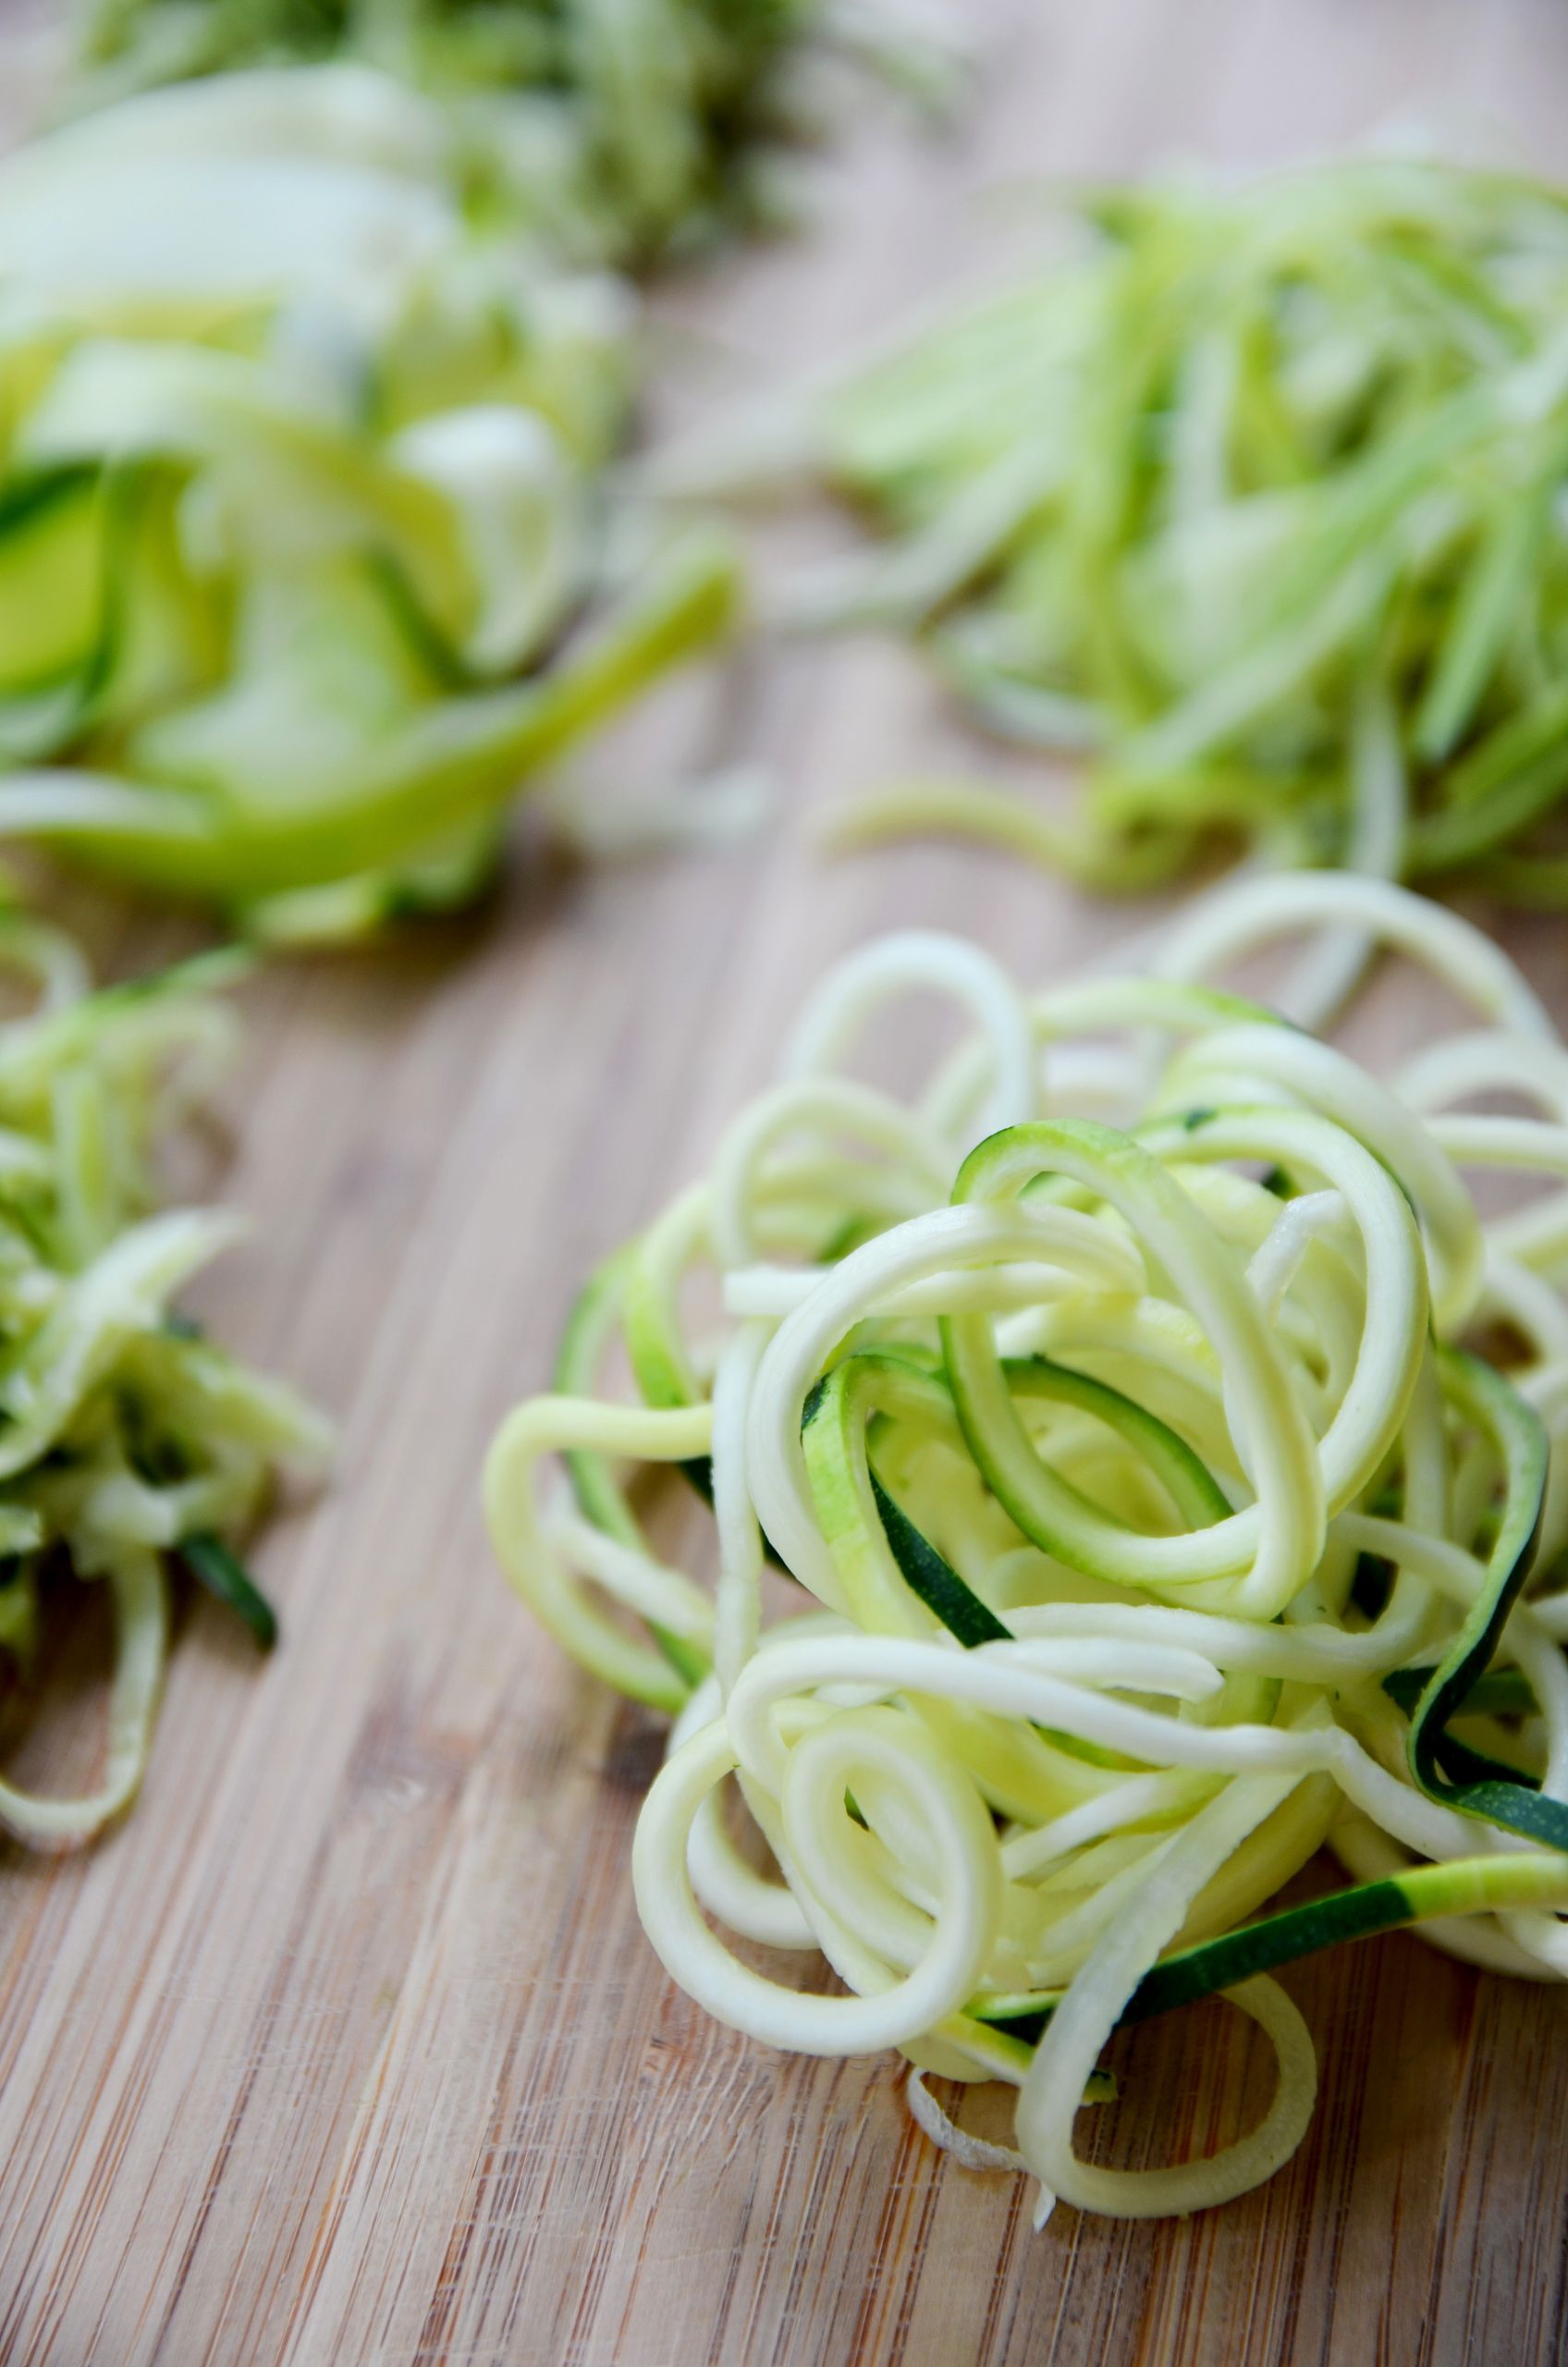 Buy Zucchini Noodles
 5 Ways to Make Zucchini Noodles Fablunch